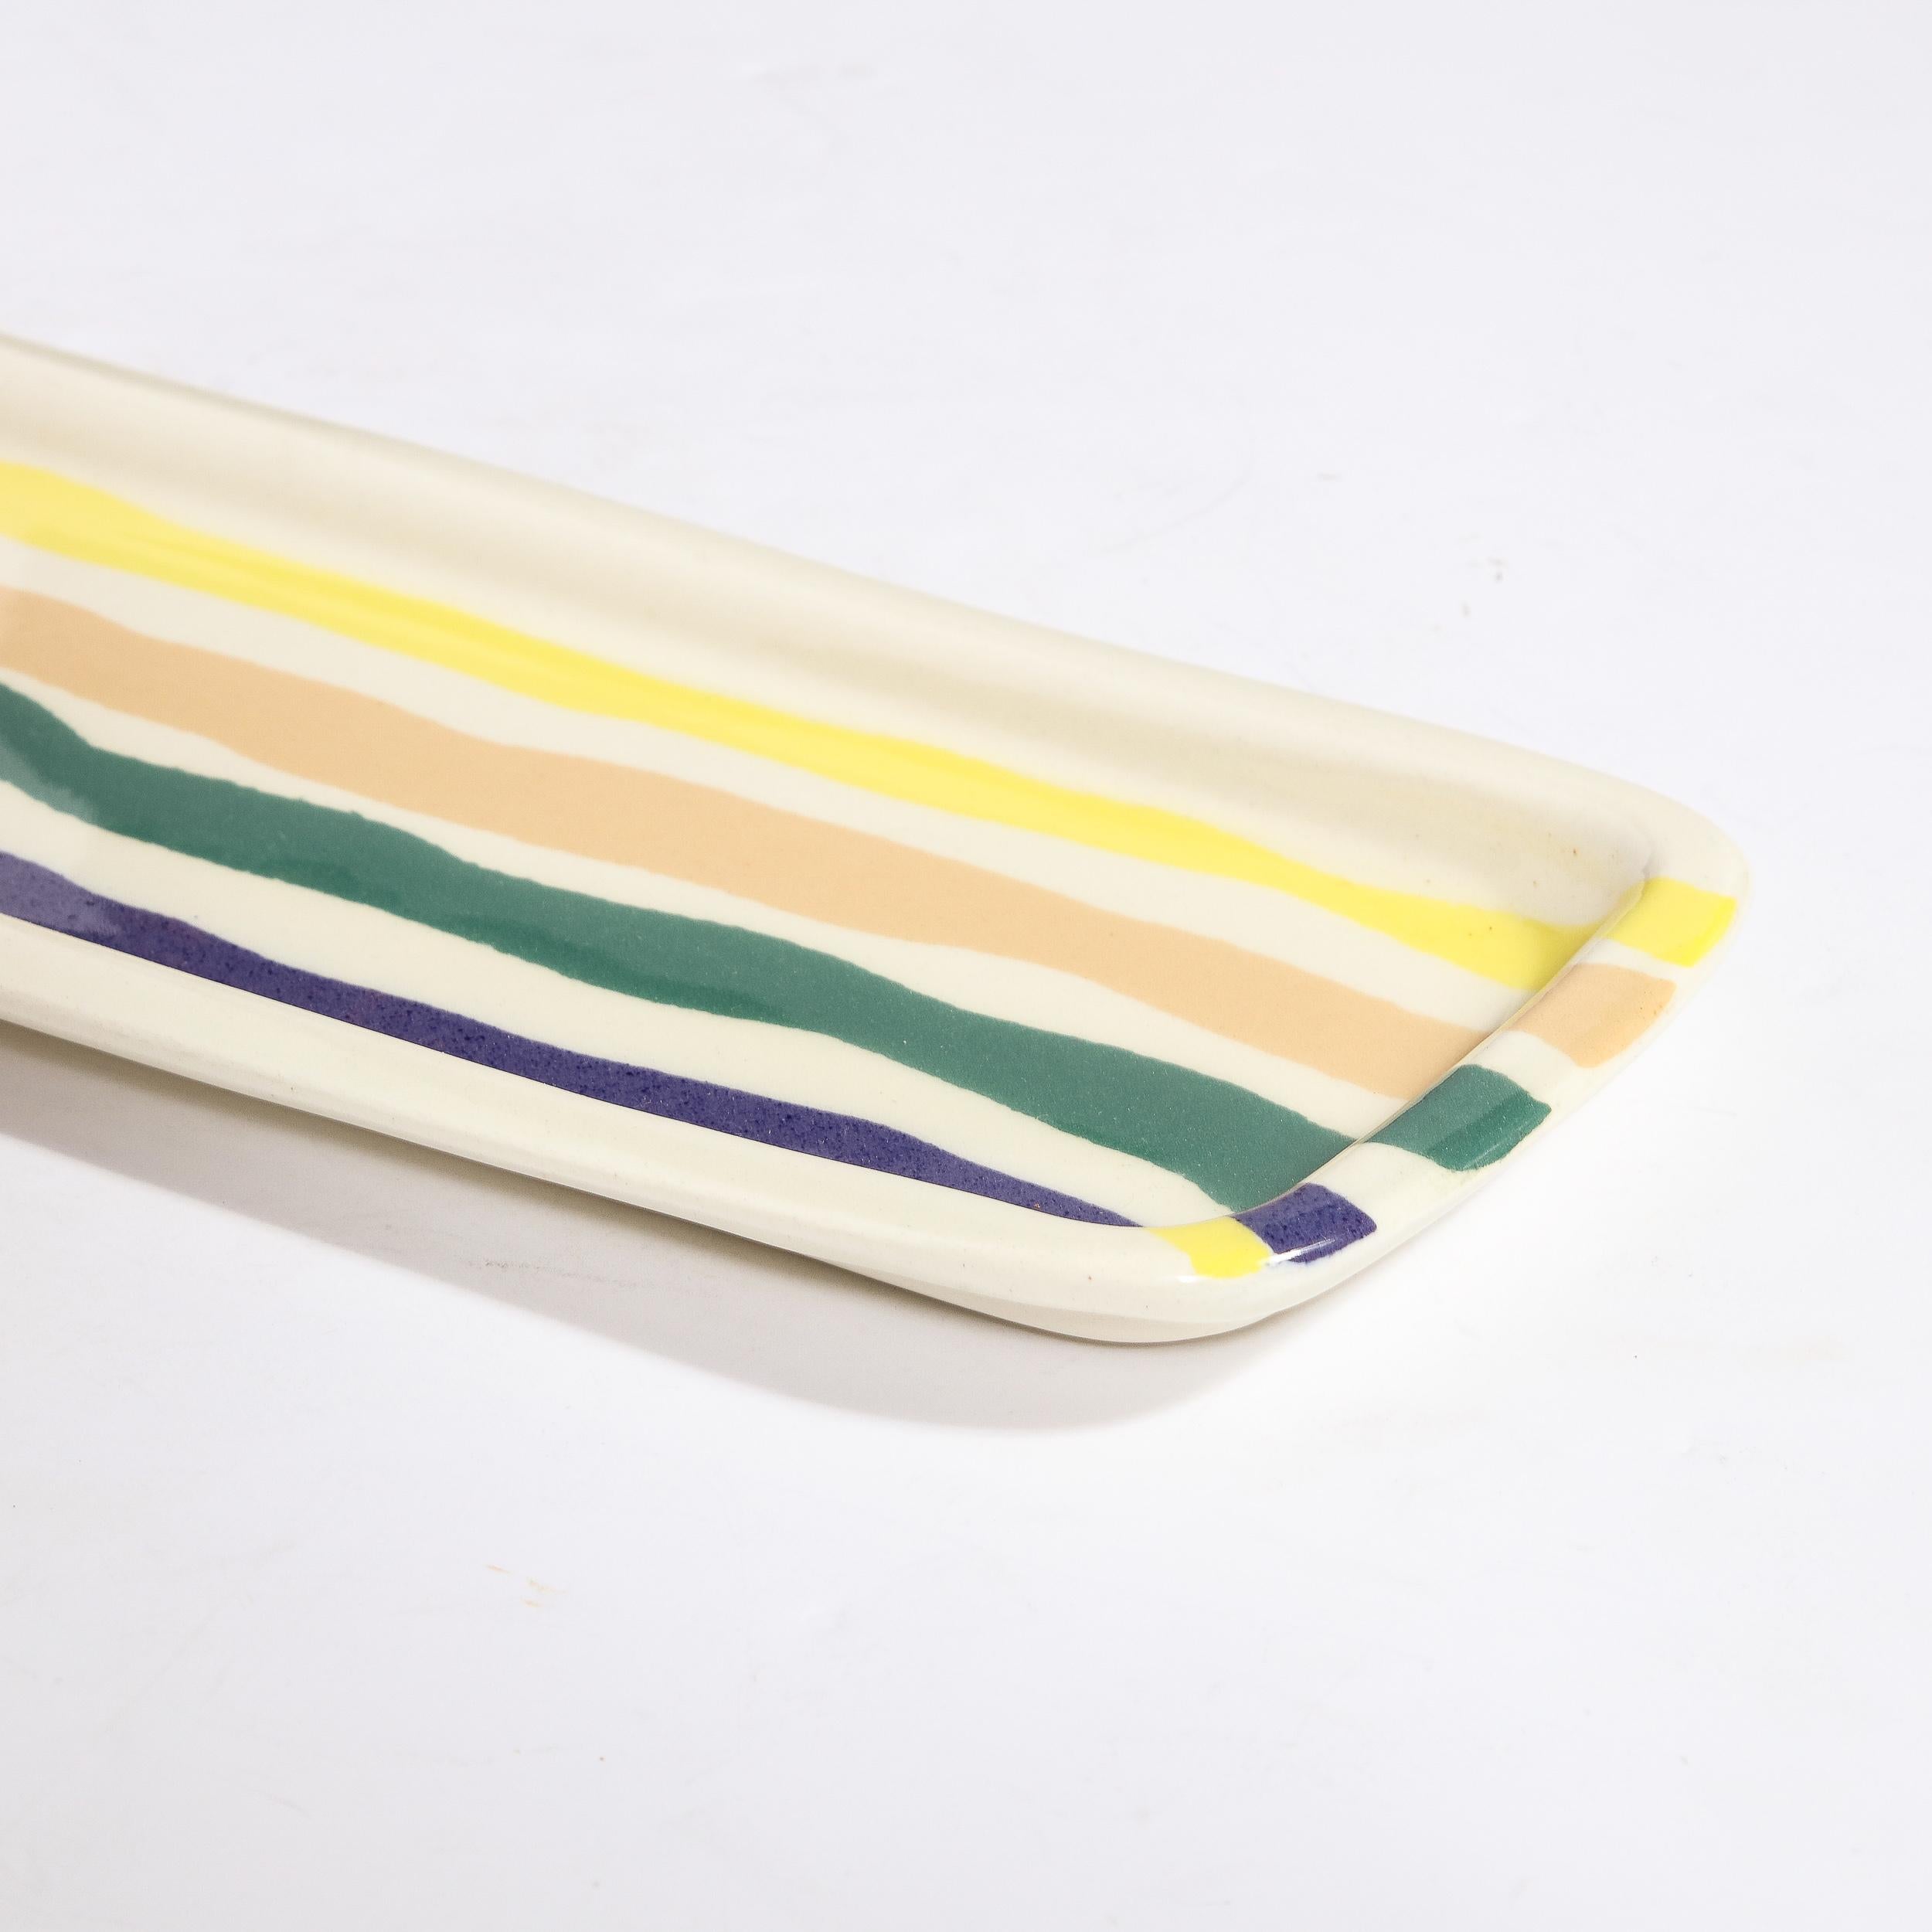 Elongated Serving Platter in Hand-Painted Ceramic by Jurg Lanrein  For Sale 4